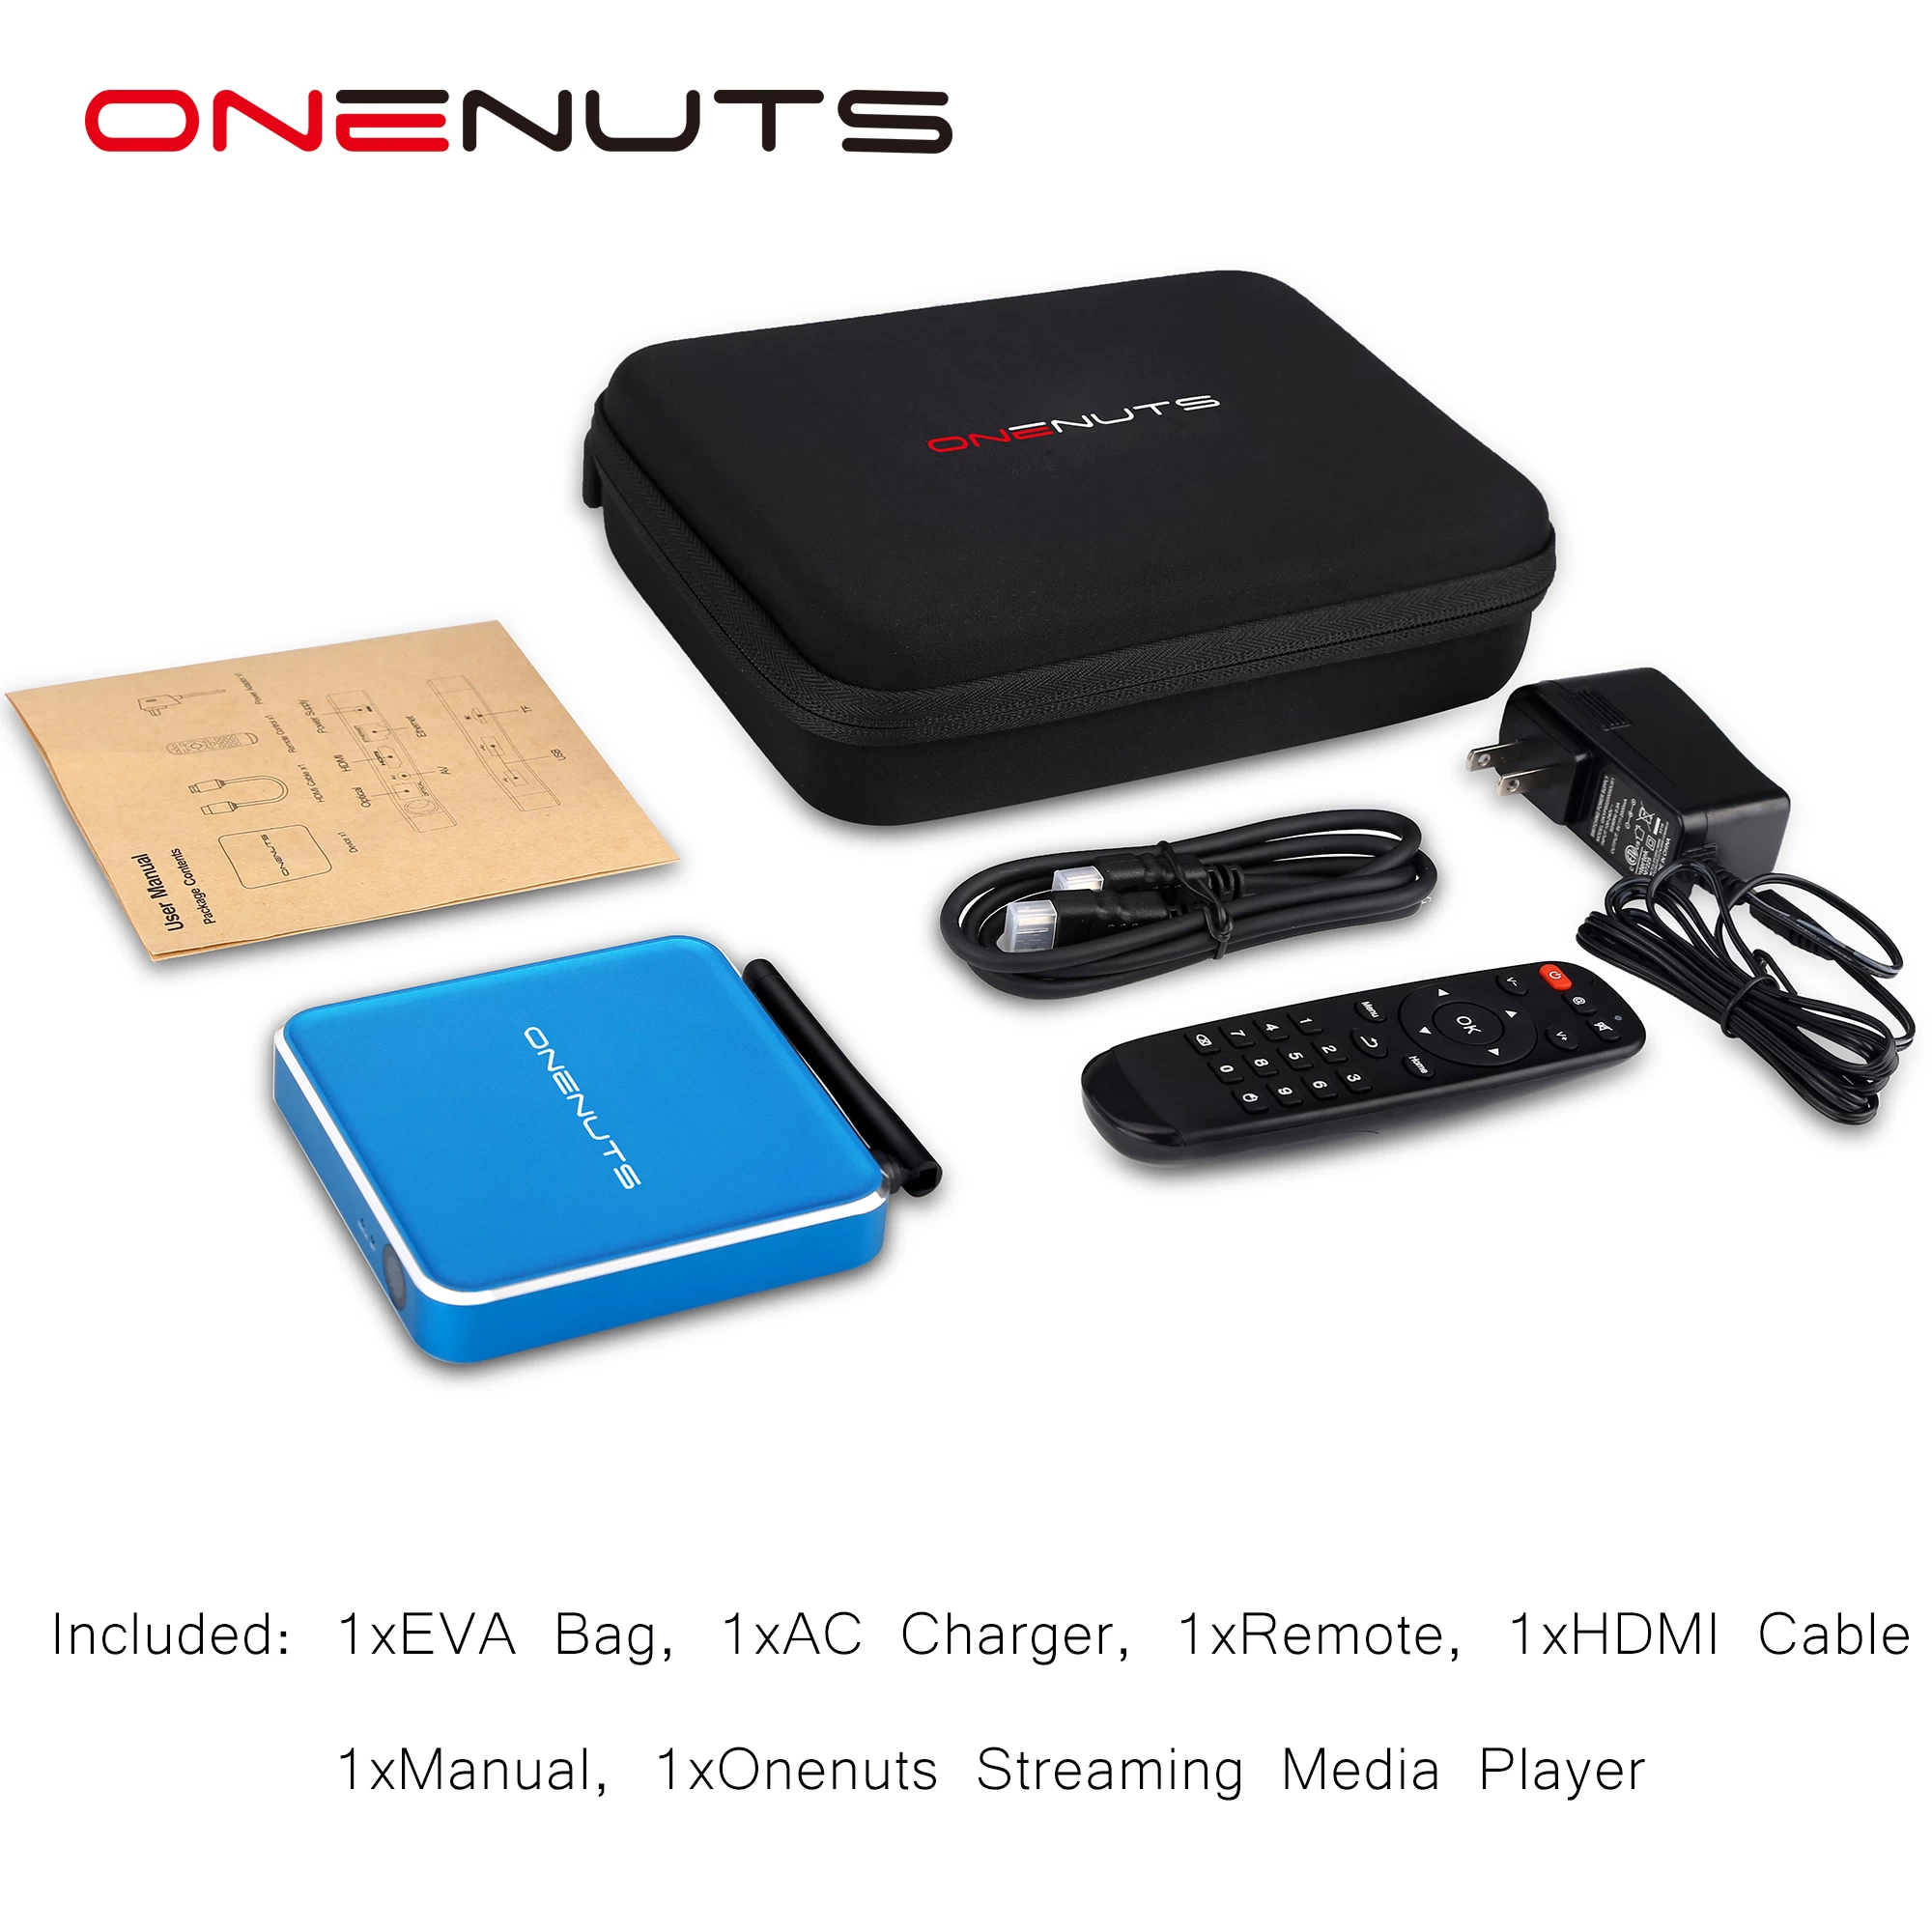 Streaming Media Player,Android TV Box,Android TV Box wholesales, Android TV Box wholesales